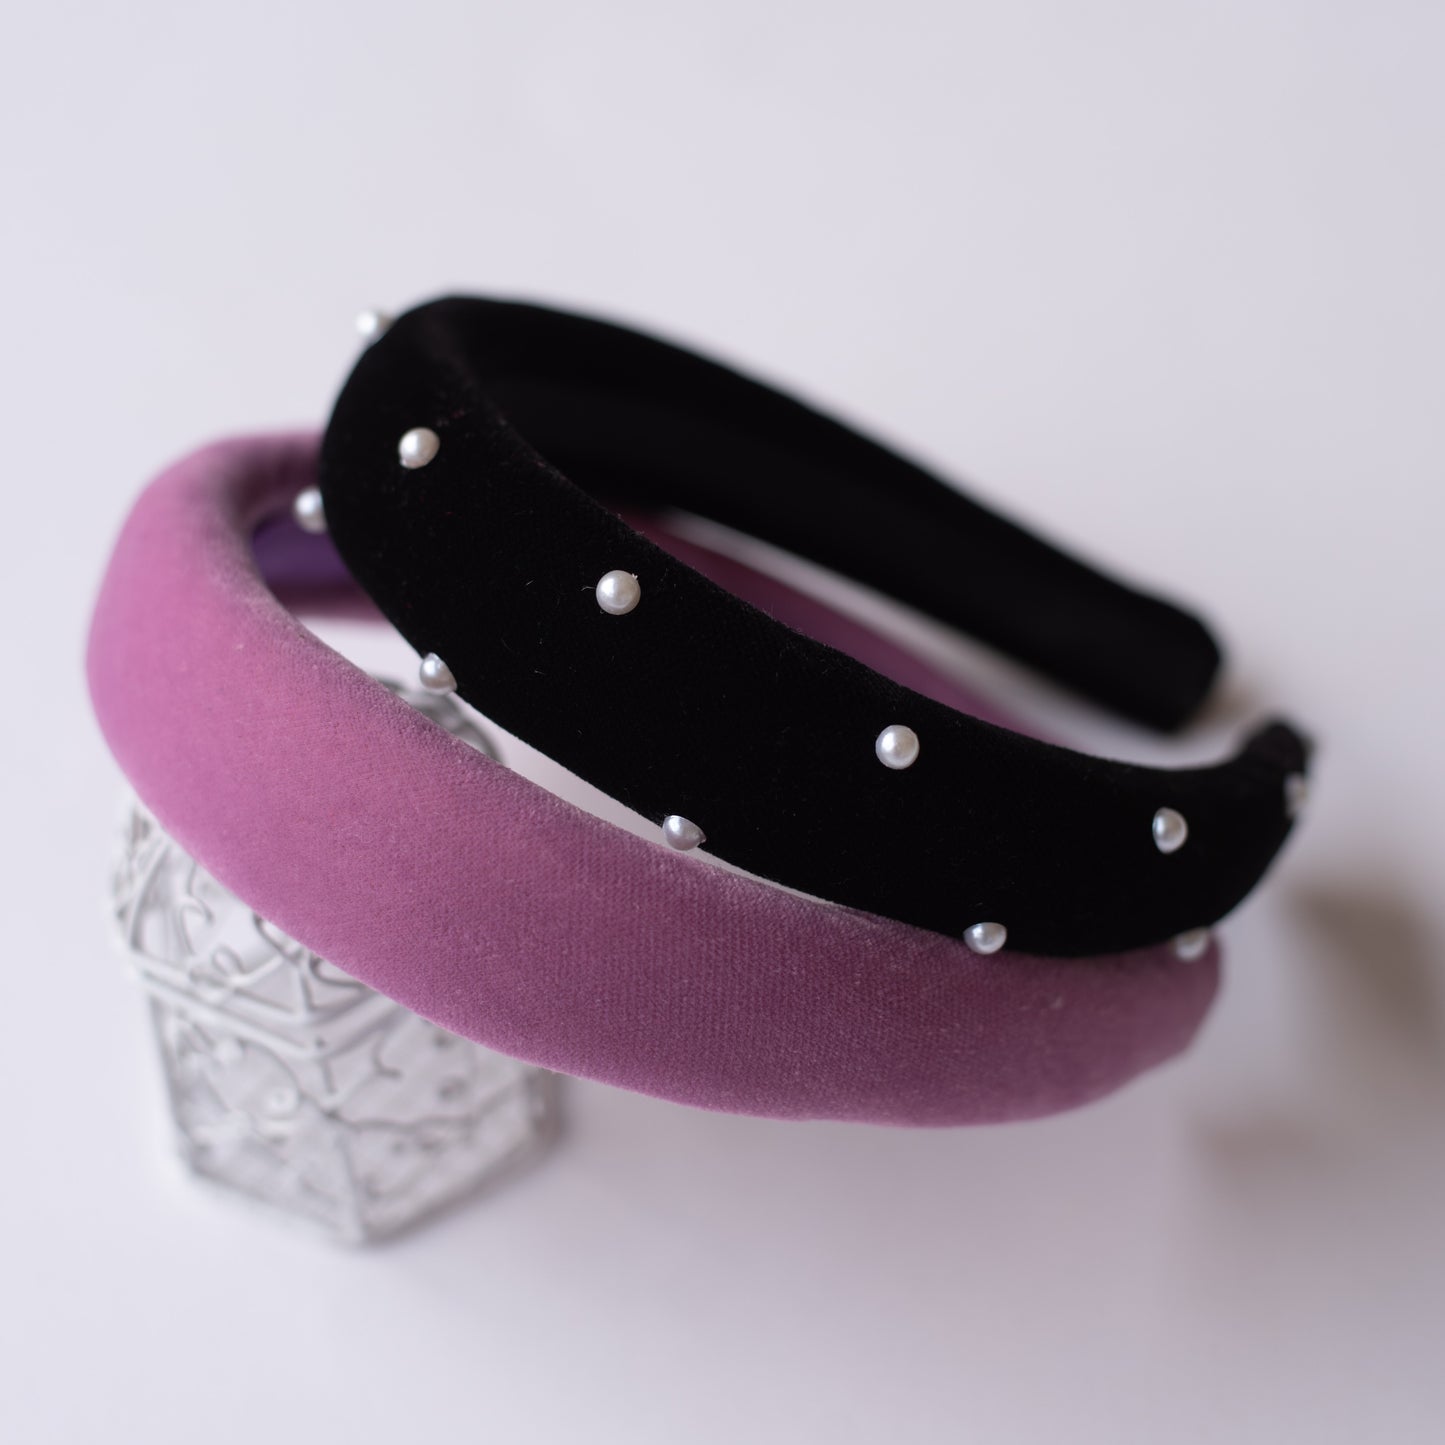 Combo: Set of 2 Soft velvet padded party hairbands - Black and Purple